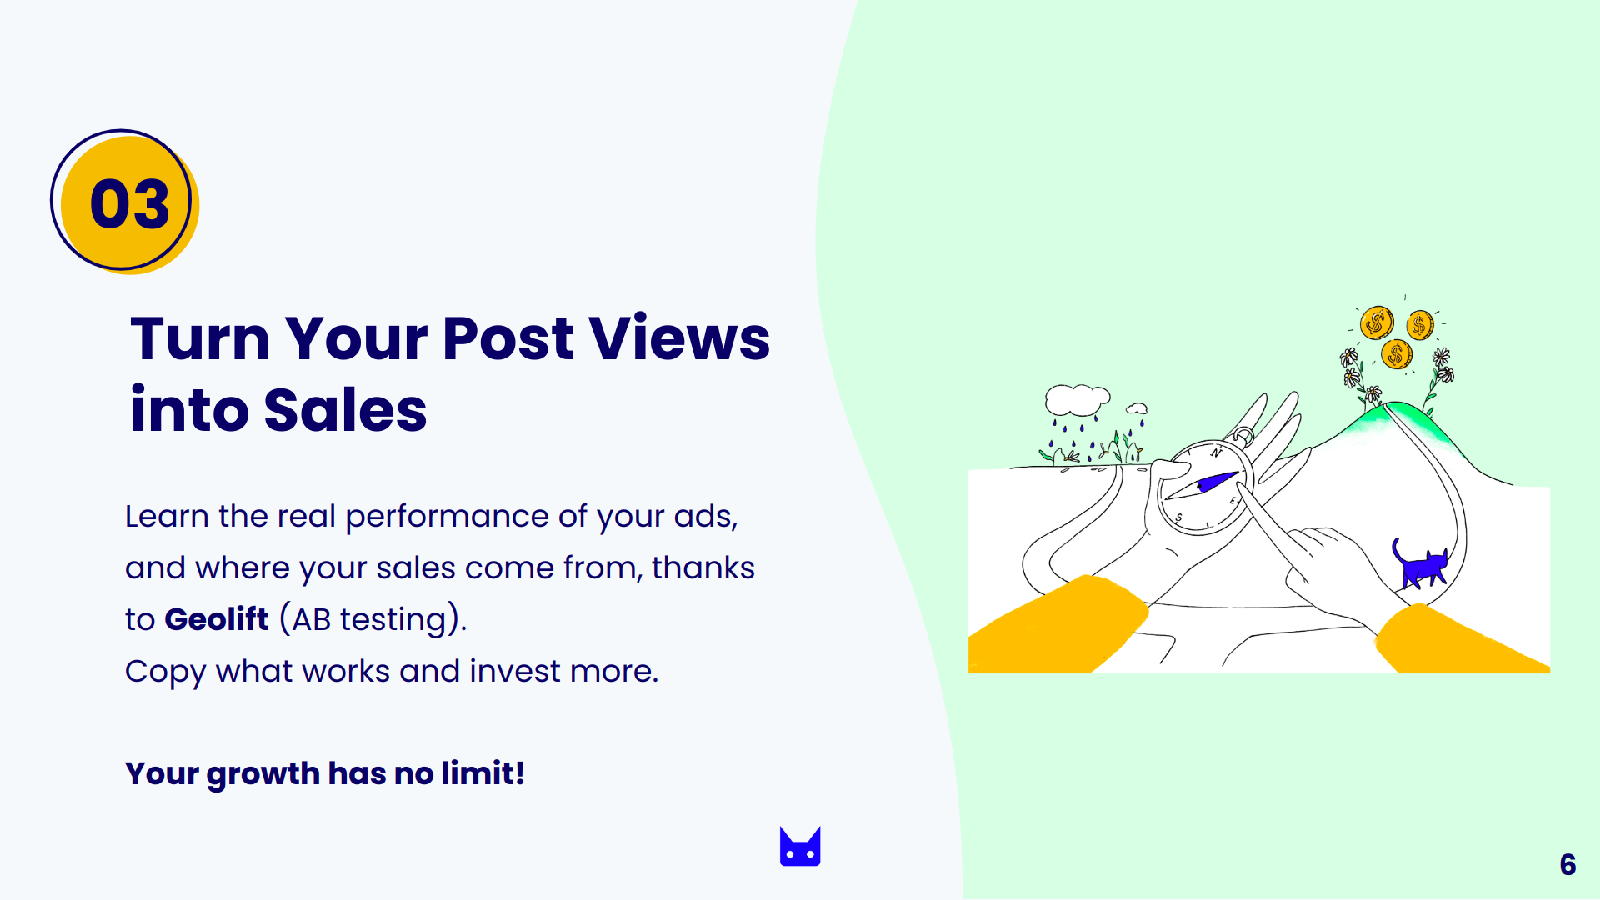 Turn Your Post Views into Sales